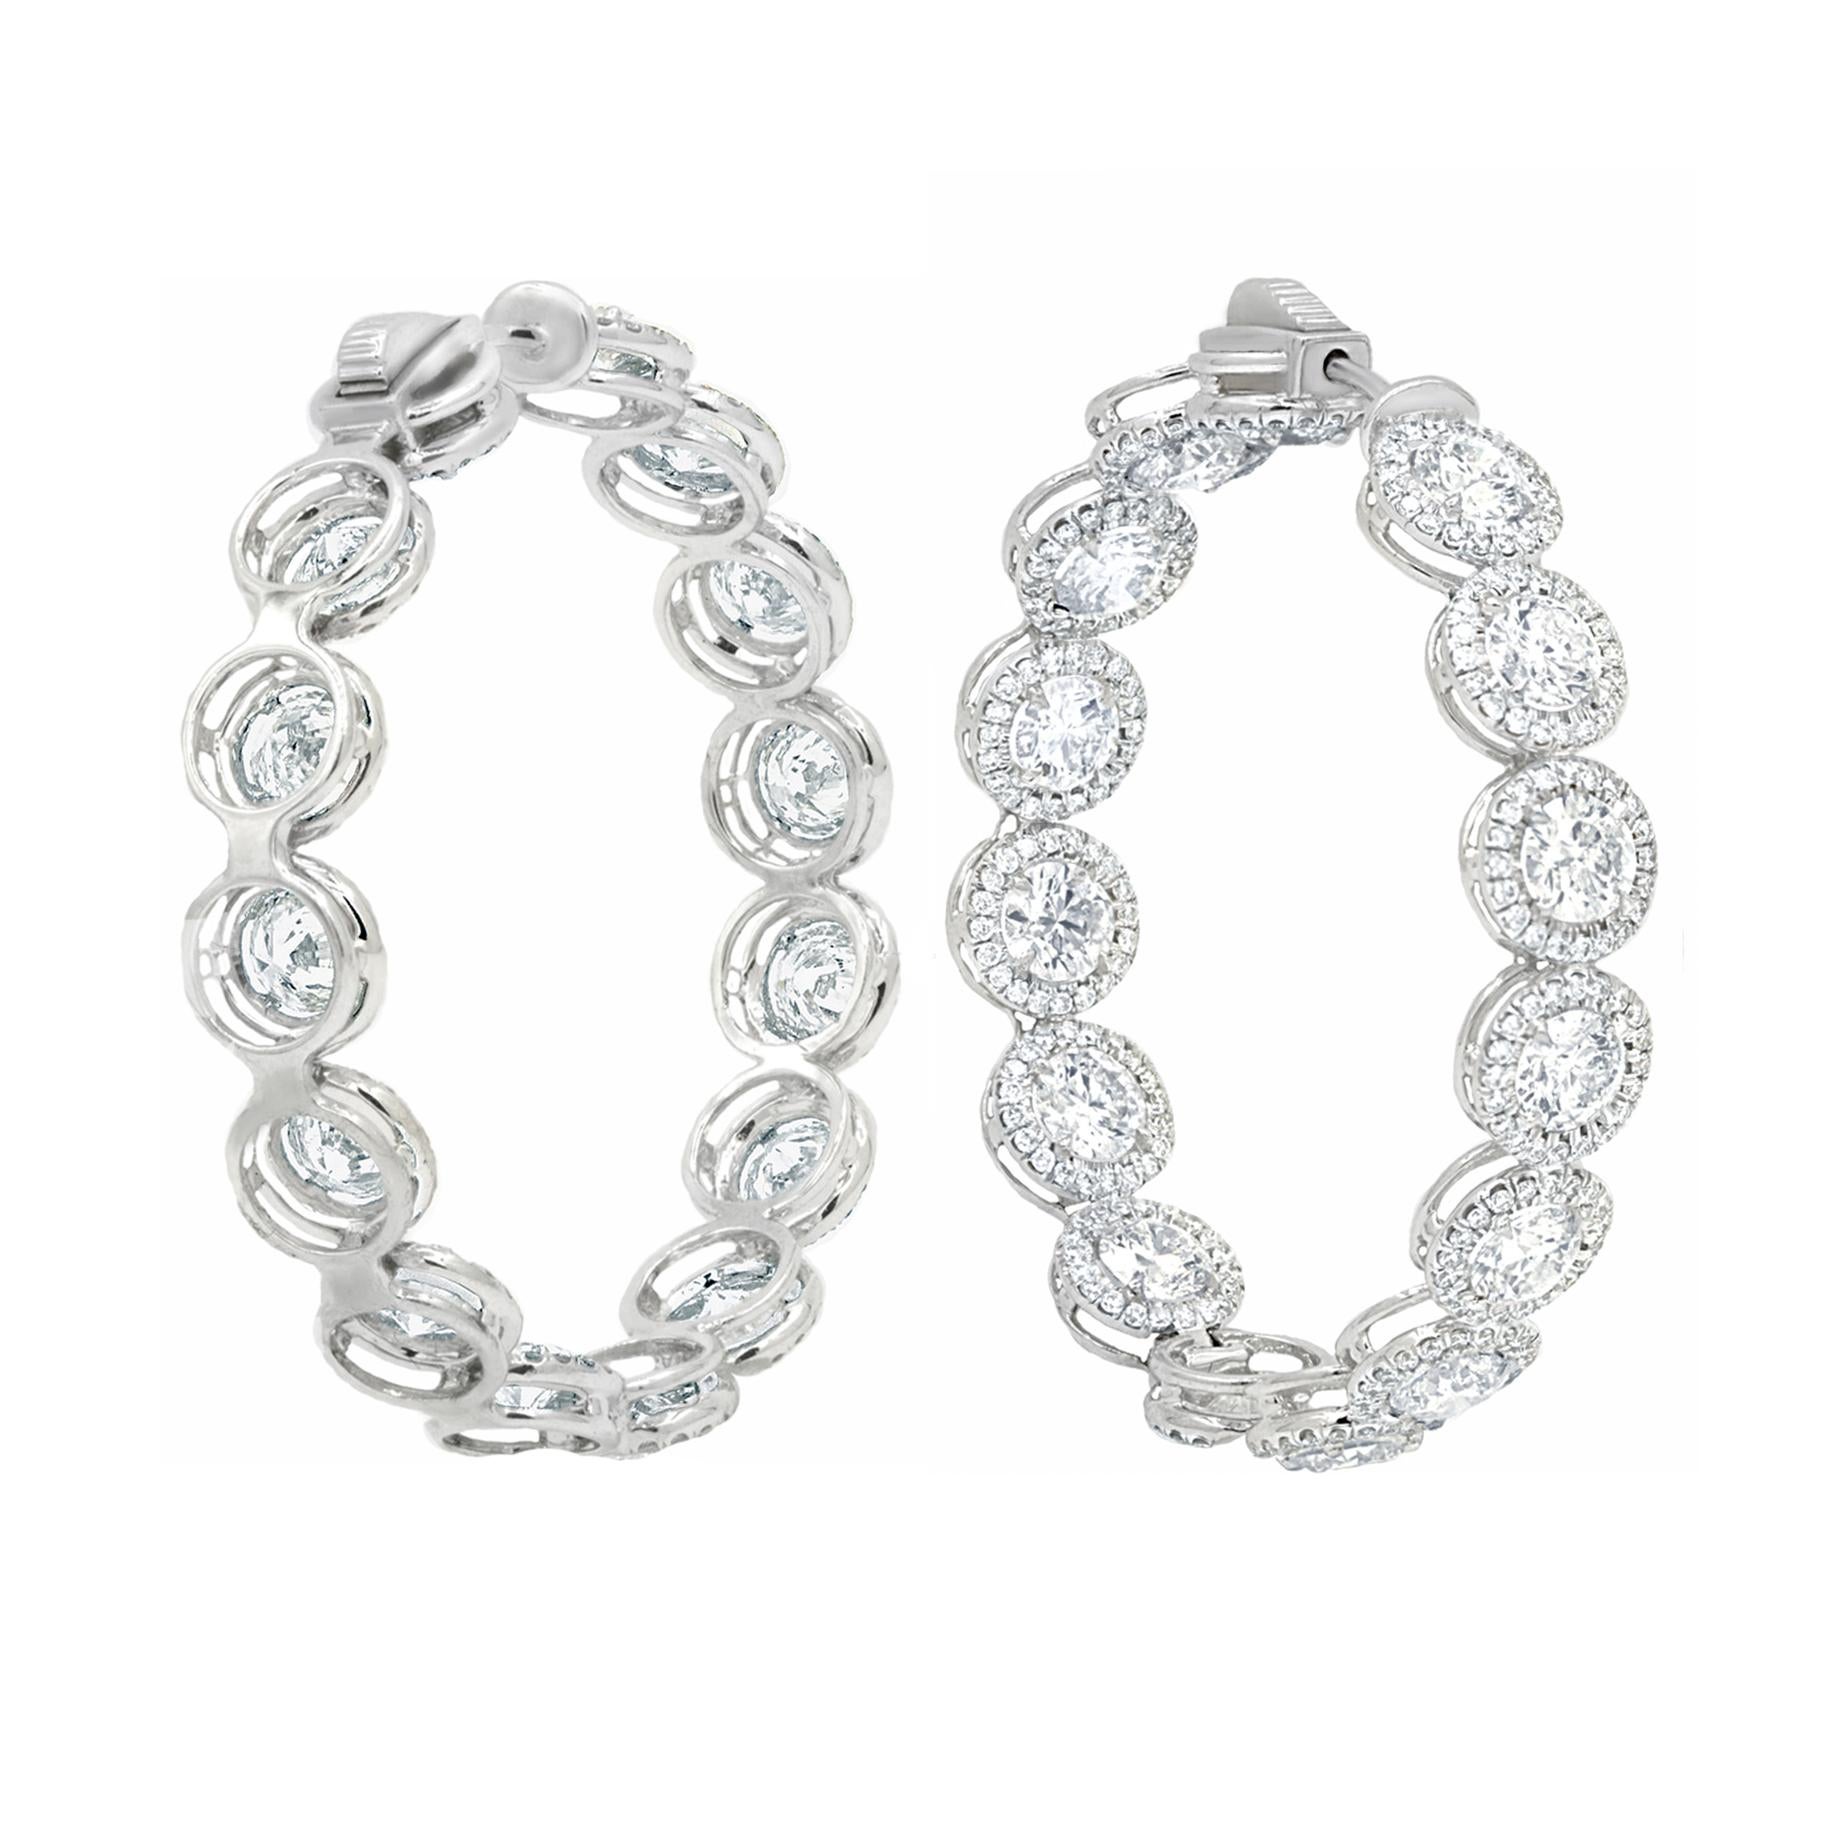 Diana M. 18 kt white gold inside-out hoop earrings with a halo design In New Condition For Sale In New York, NY